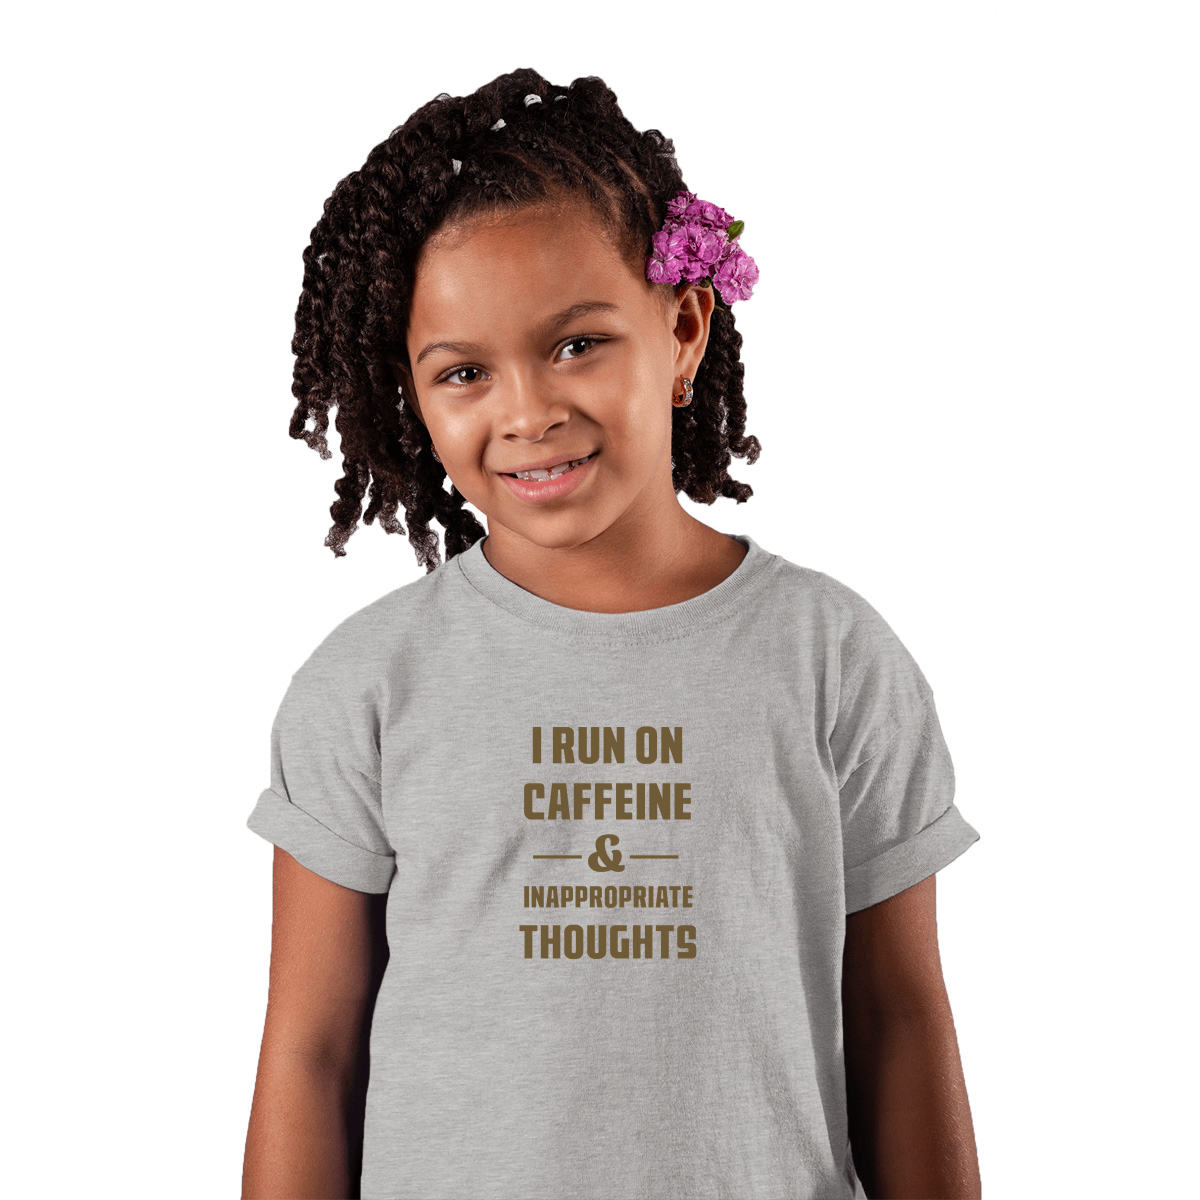 I Run On Caffeine and Inappropriate Thoughts Toddler T-shirt | Gray